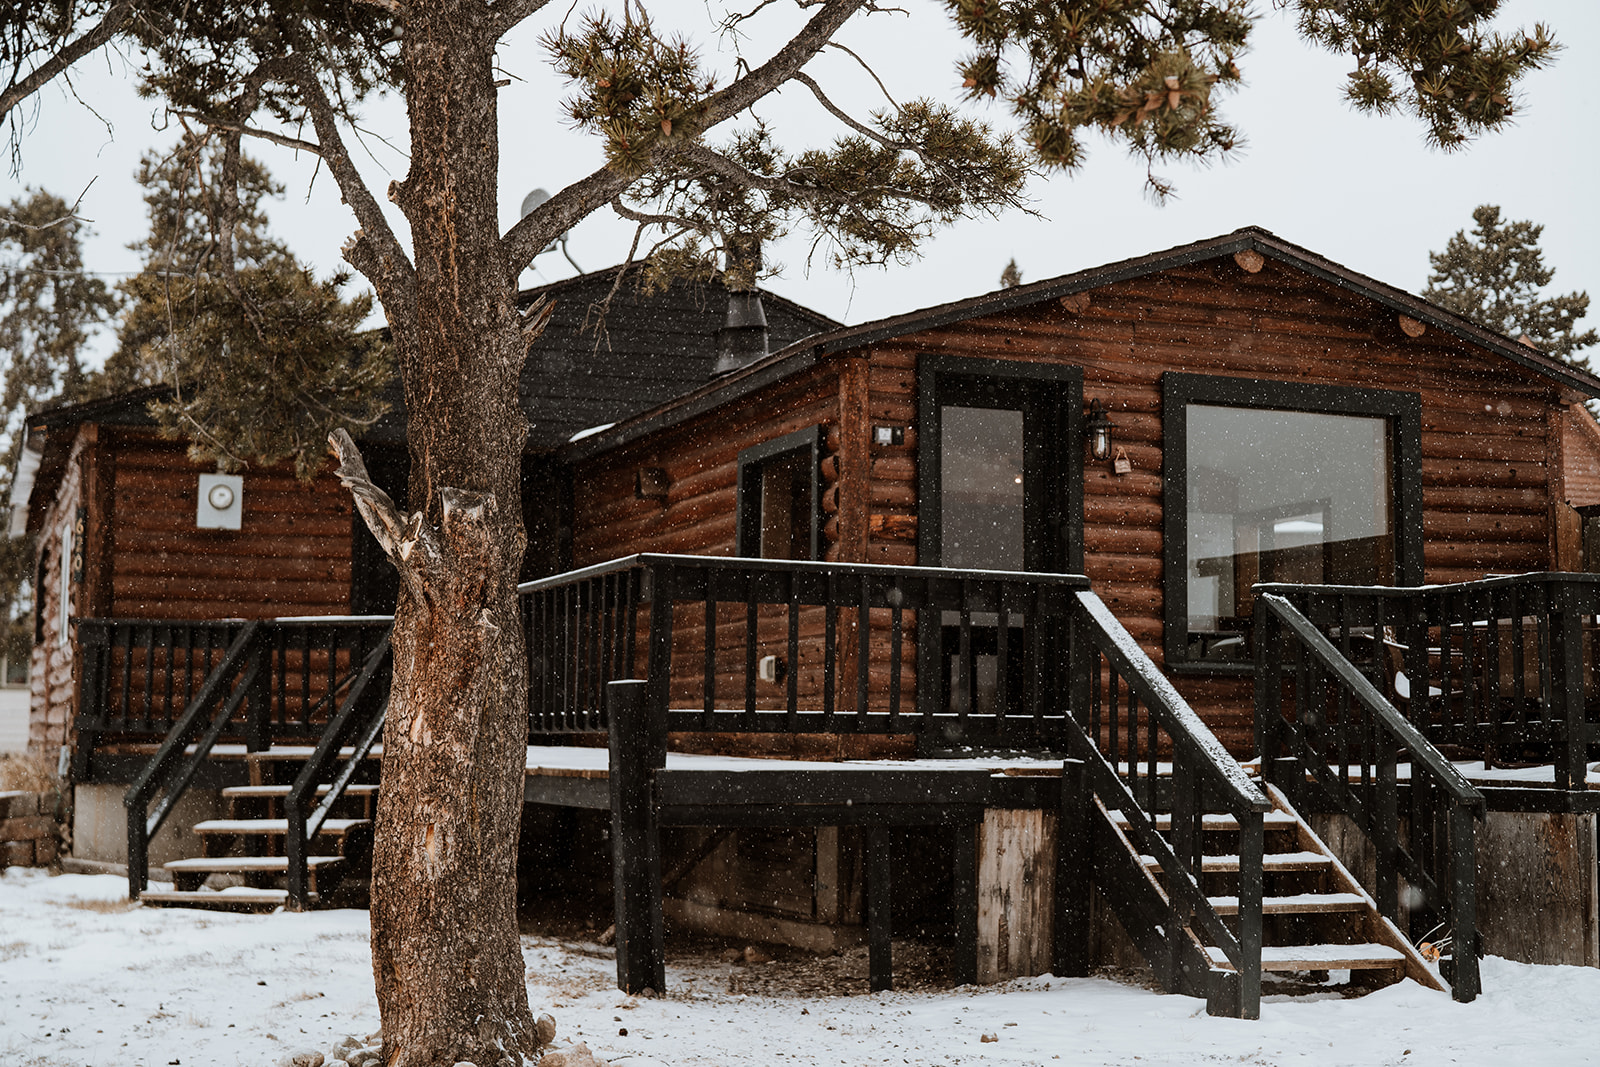 The Fairplay Cabin, in Fairplay, CO, as photographed by Basecamp Visual.